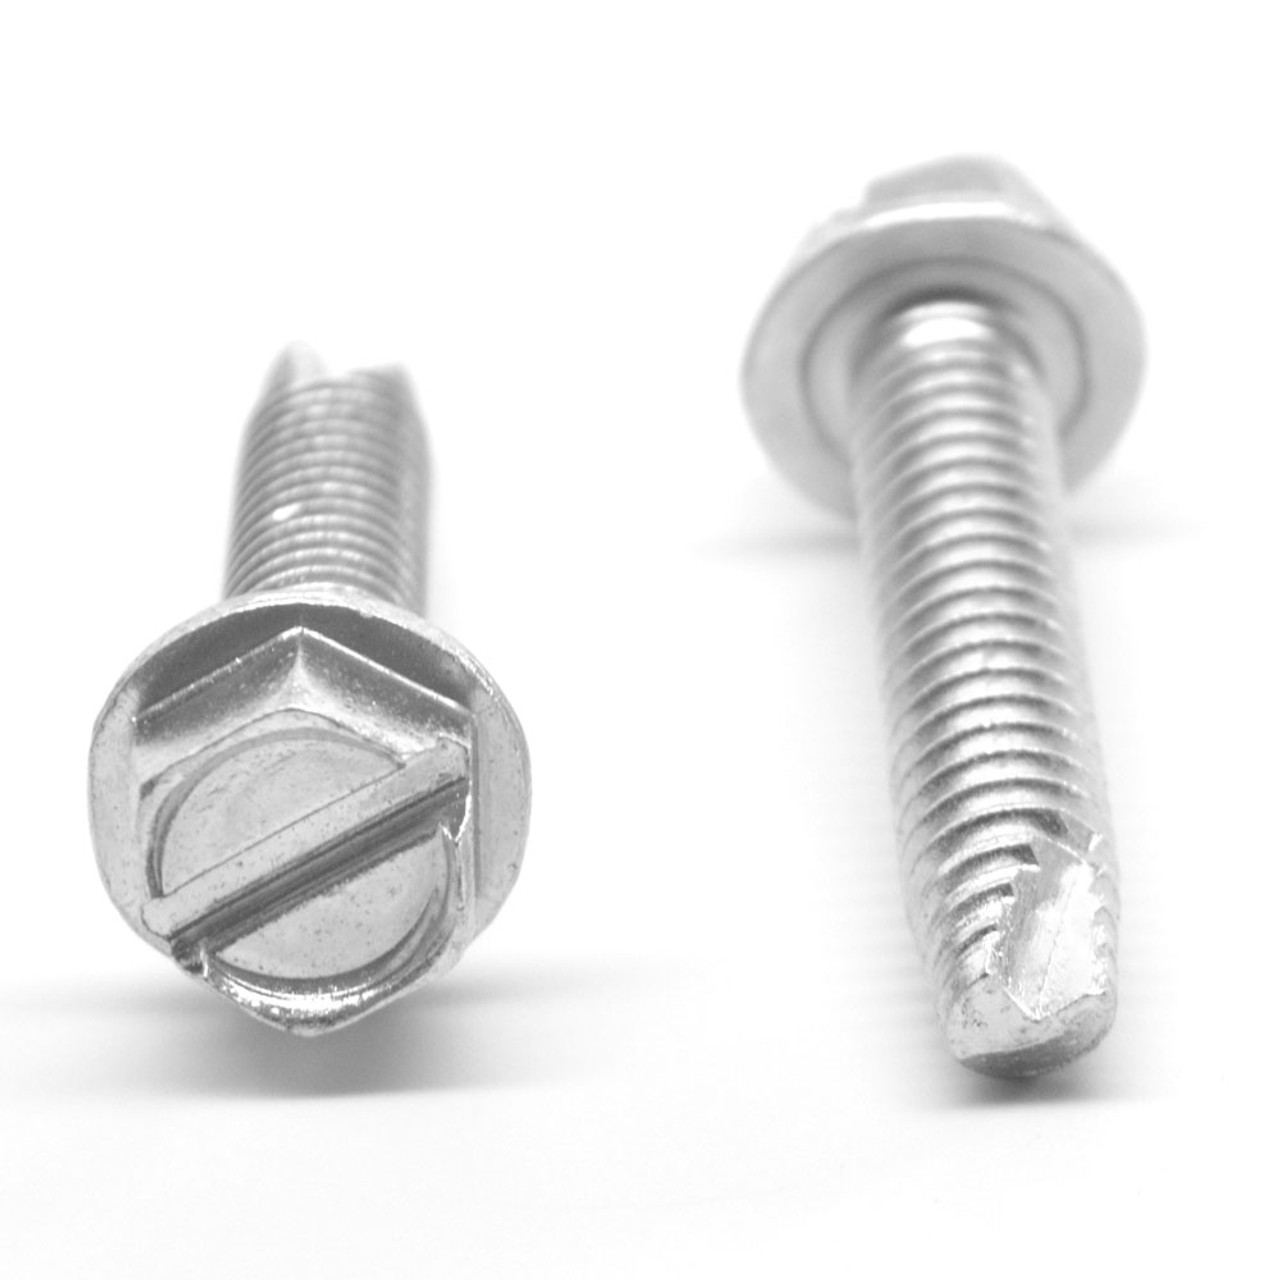 #6-32 x 3/8" (FT) Coarse Thread Thread Cutting Screw Slotted Hex Washer Head Type 23 Stainless Steel 18-8